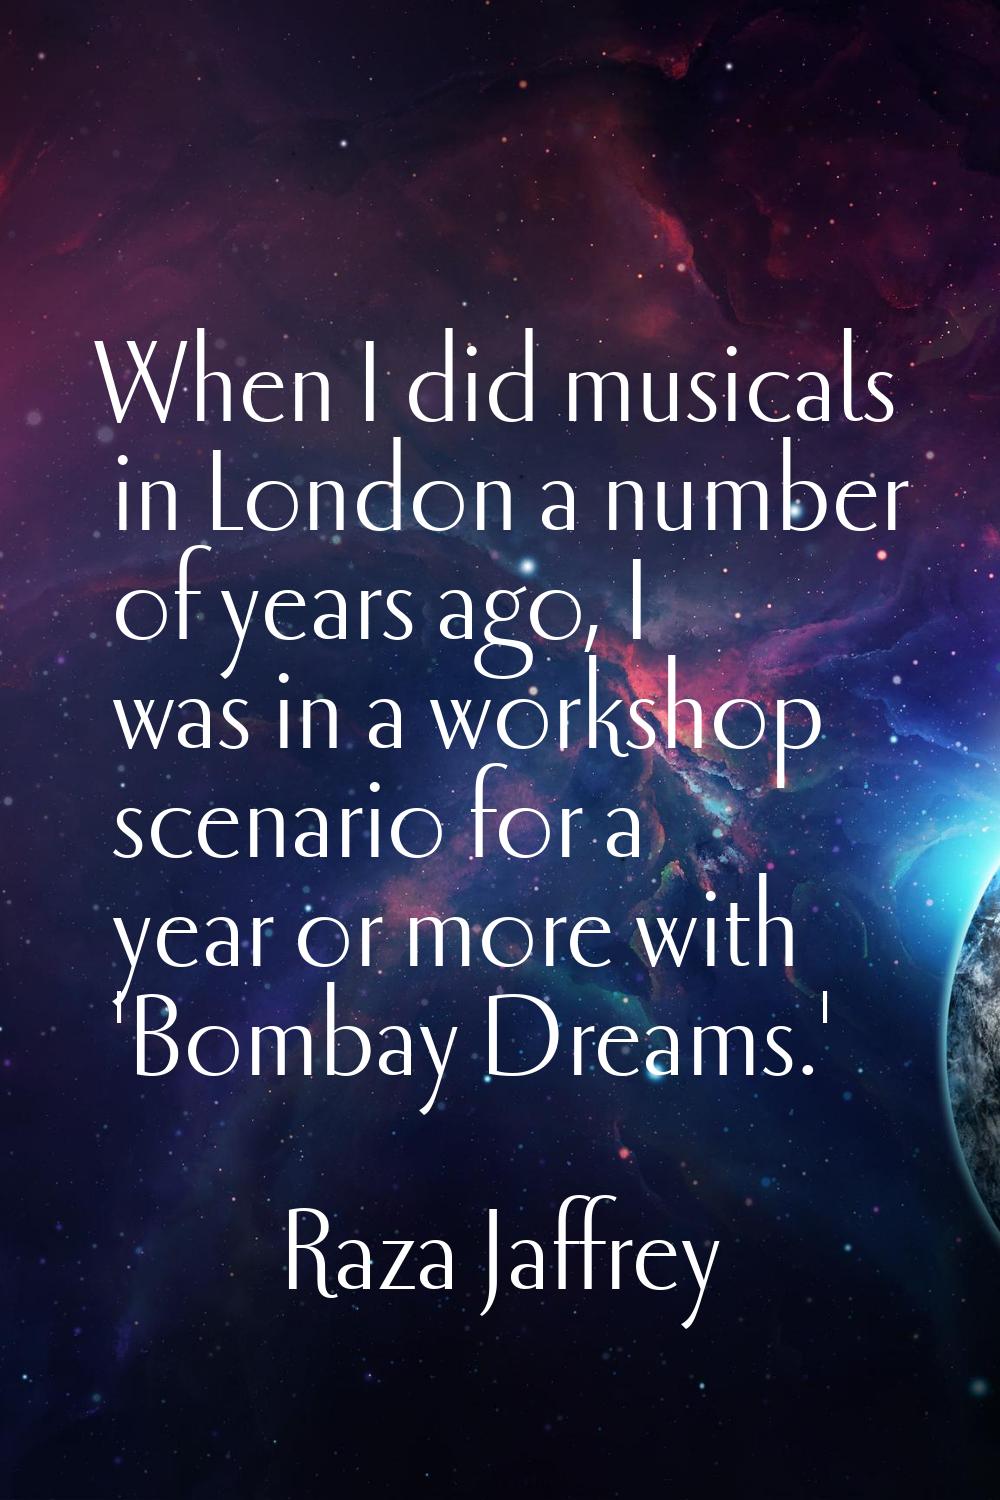 When I did musicals in London a number of years ago, I was in a workshop scenario for a year or mor